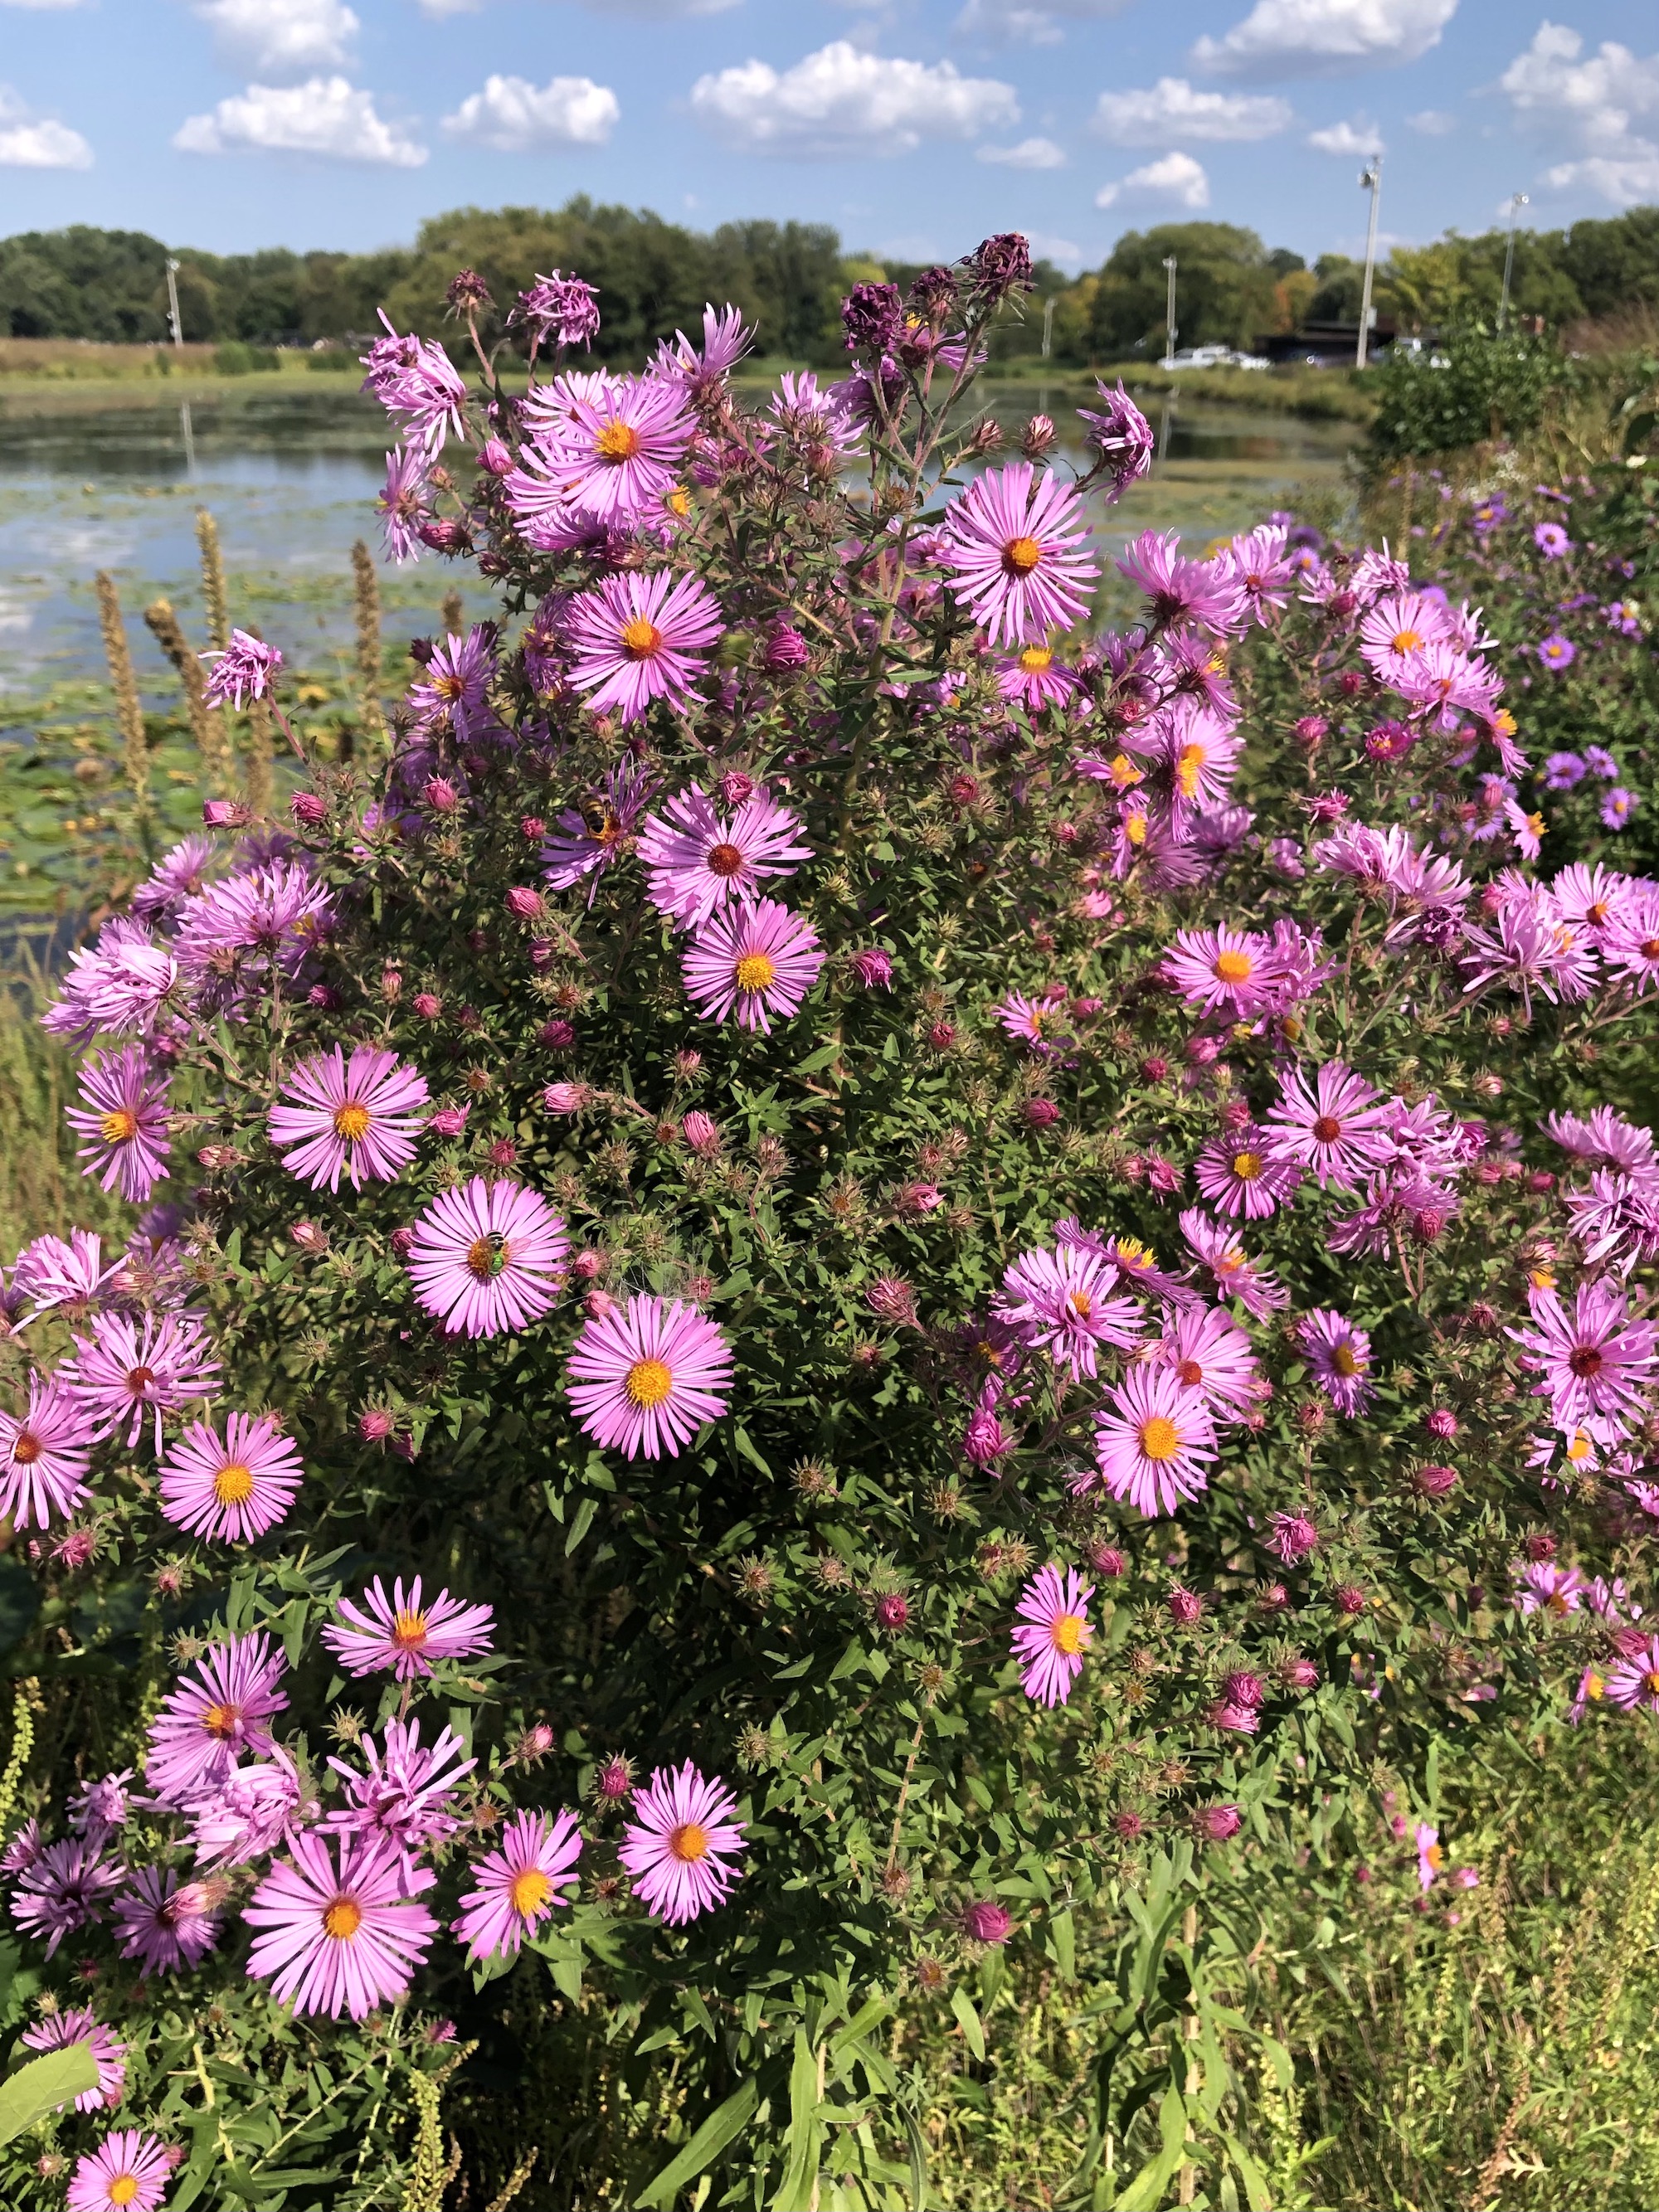 New England Aster on shore of Vilas Park Lagoon in Madison, Wisconsin on September 19, 2022.